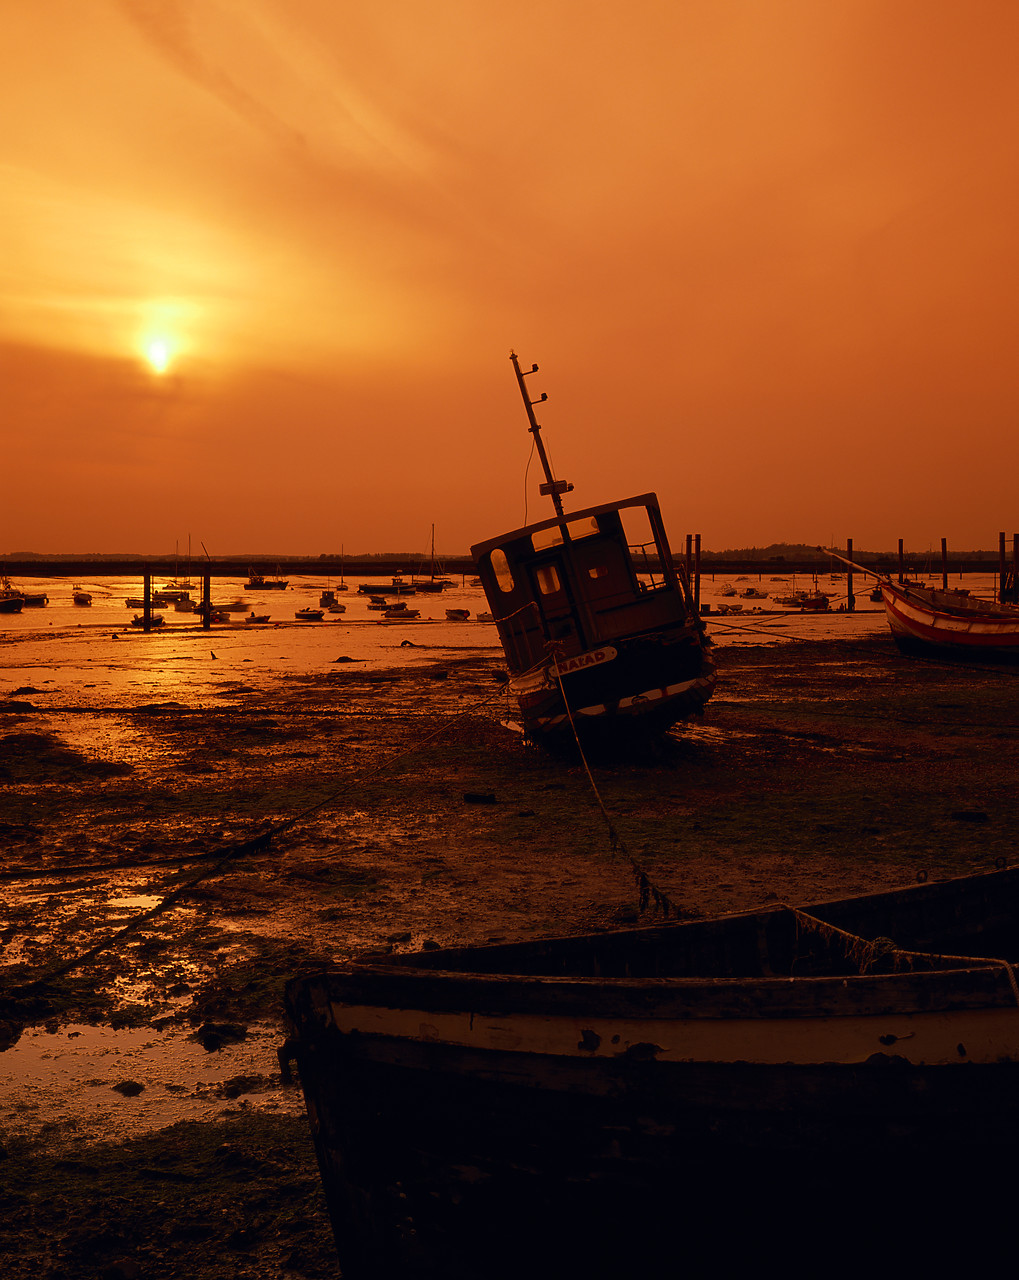 #944546-2 - Fishing Boats at Sunset, West Mersea, Essex, England